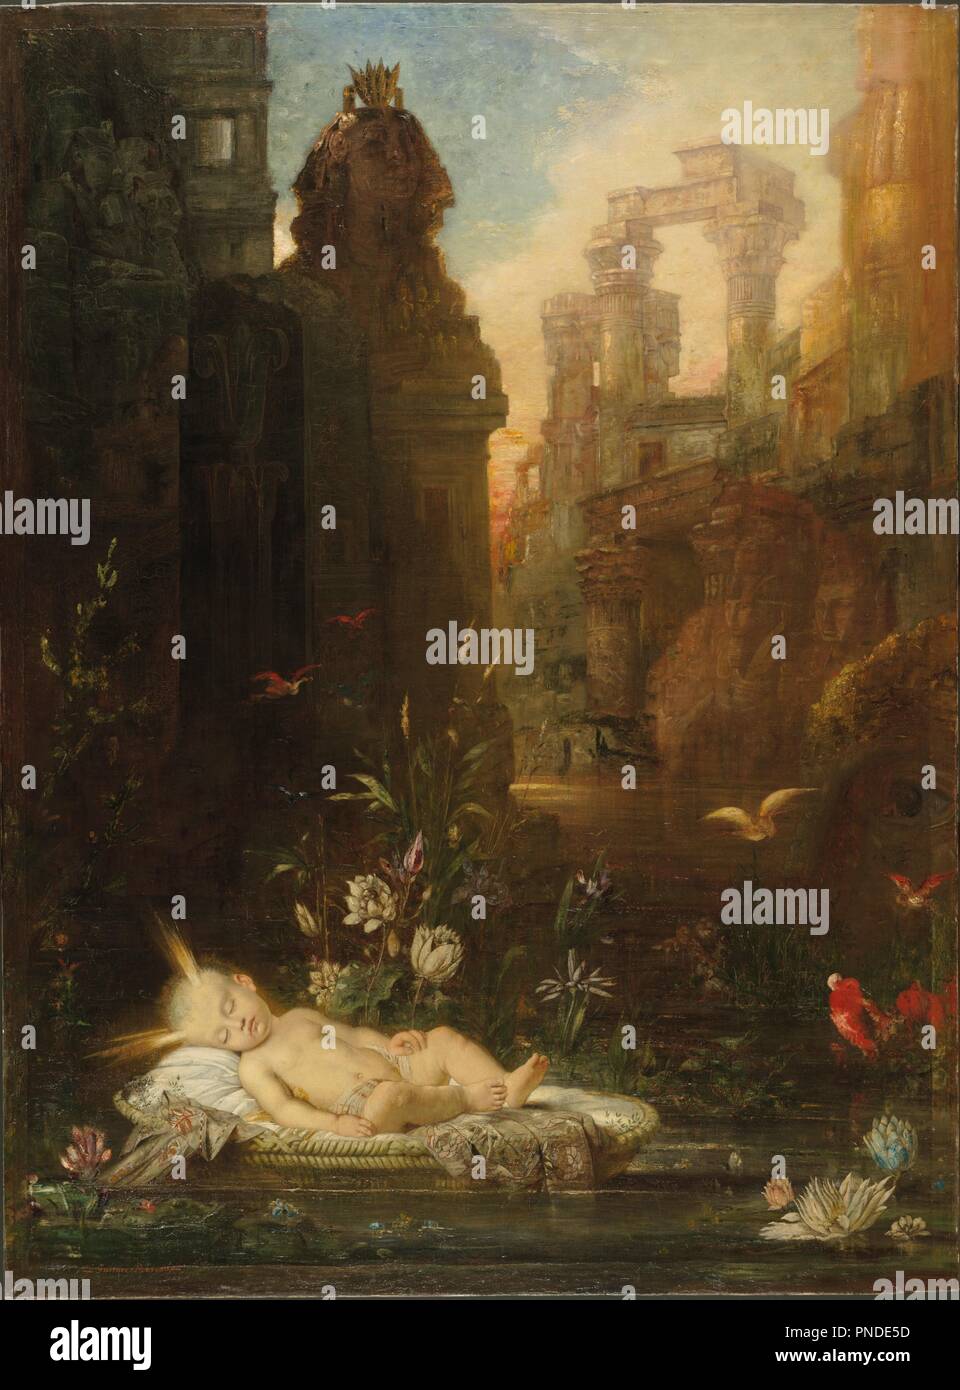 The Infant Moses. Date/Period: Ca. 1876-1878. Painting. Oil on canvas. Height: 185 cm (72.8 in); Width: 136.2 cm (53.6 in). Author: GUSTAVE MOREAU. Stock Photo